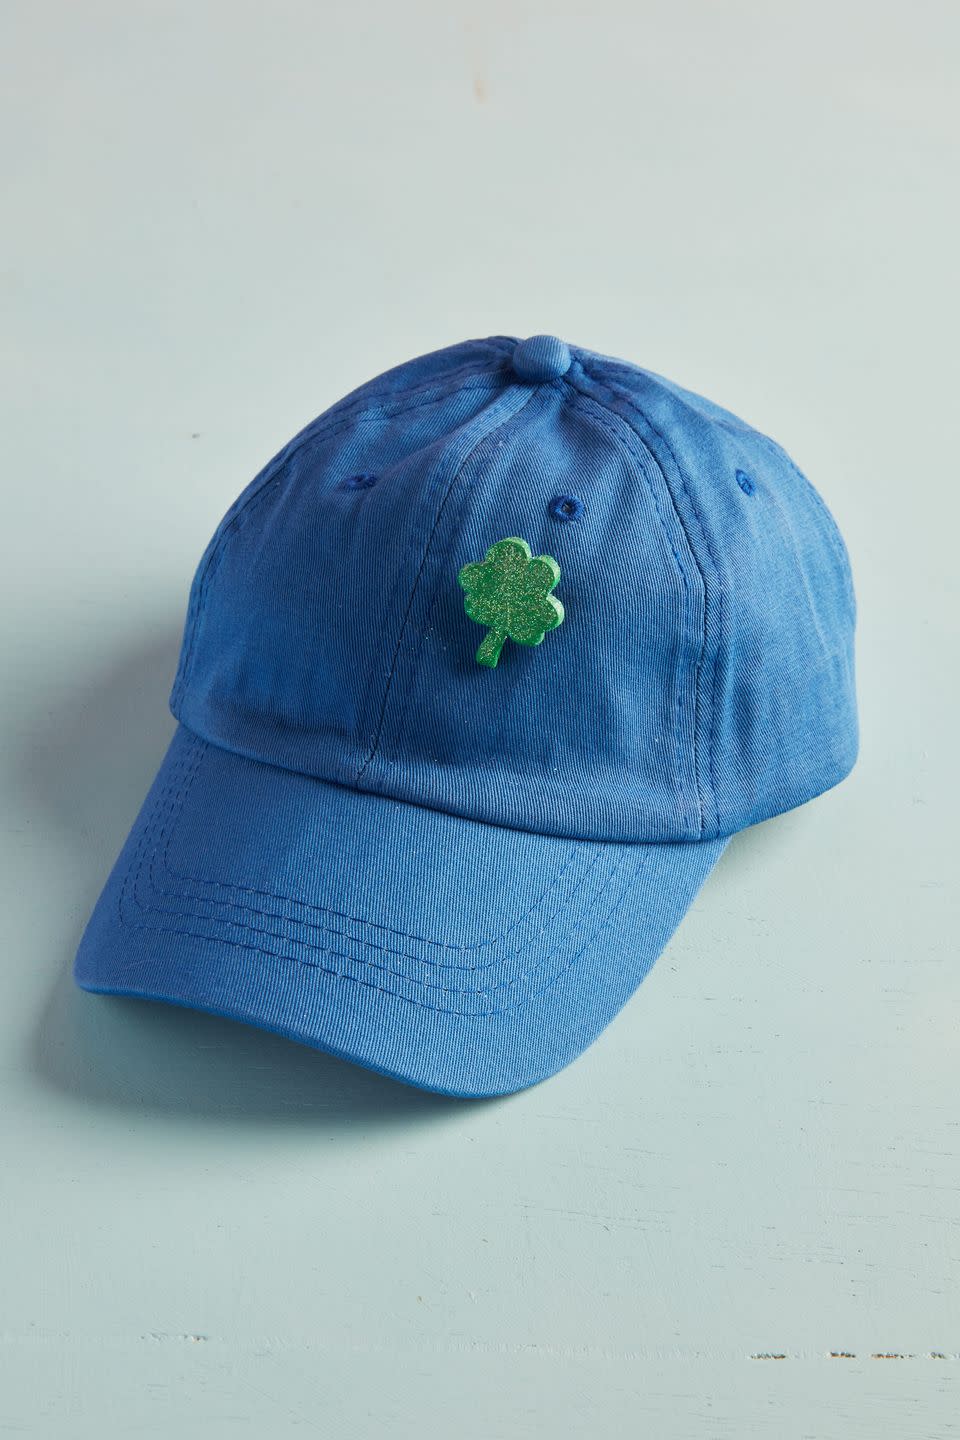 sparkly green st patricks day clover pin on a blue baseball hat